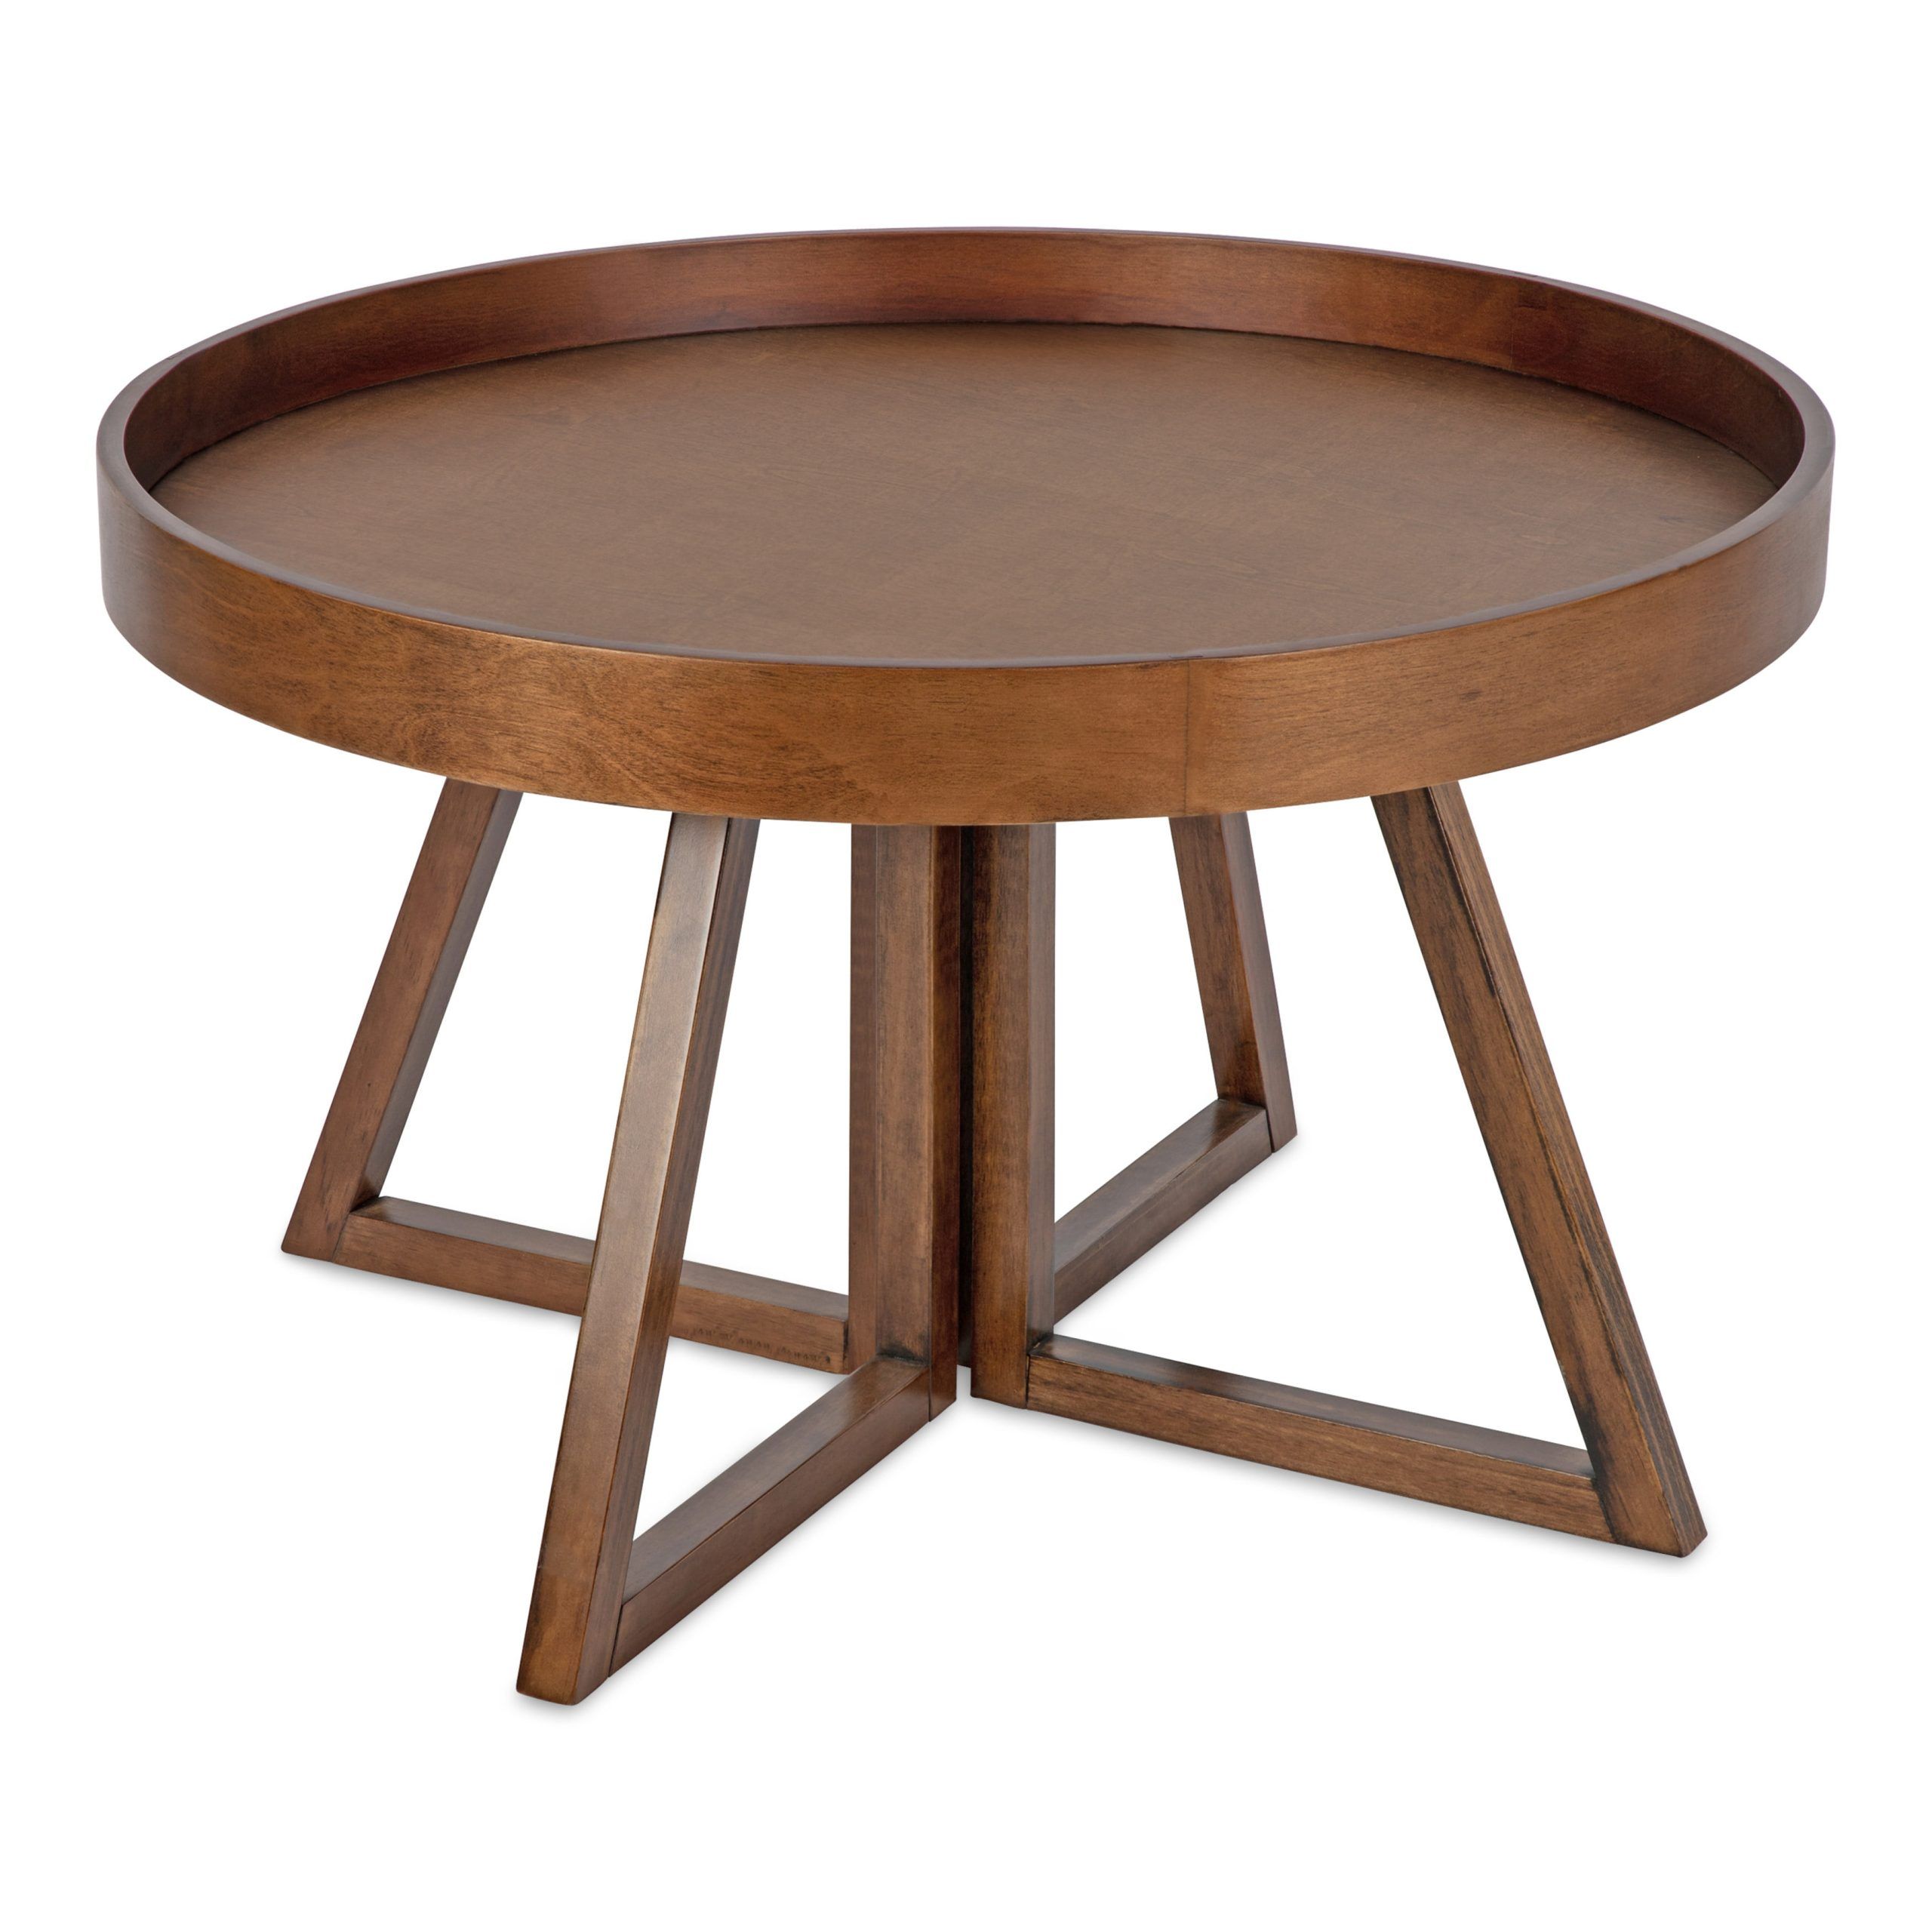 Kate And Laurel Avery Modern Round Coffee Table, 30" X 30" X 18 With Walnut Coffee Tables (View 6 of 15)